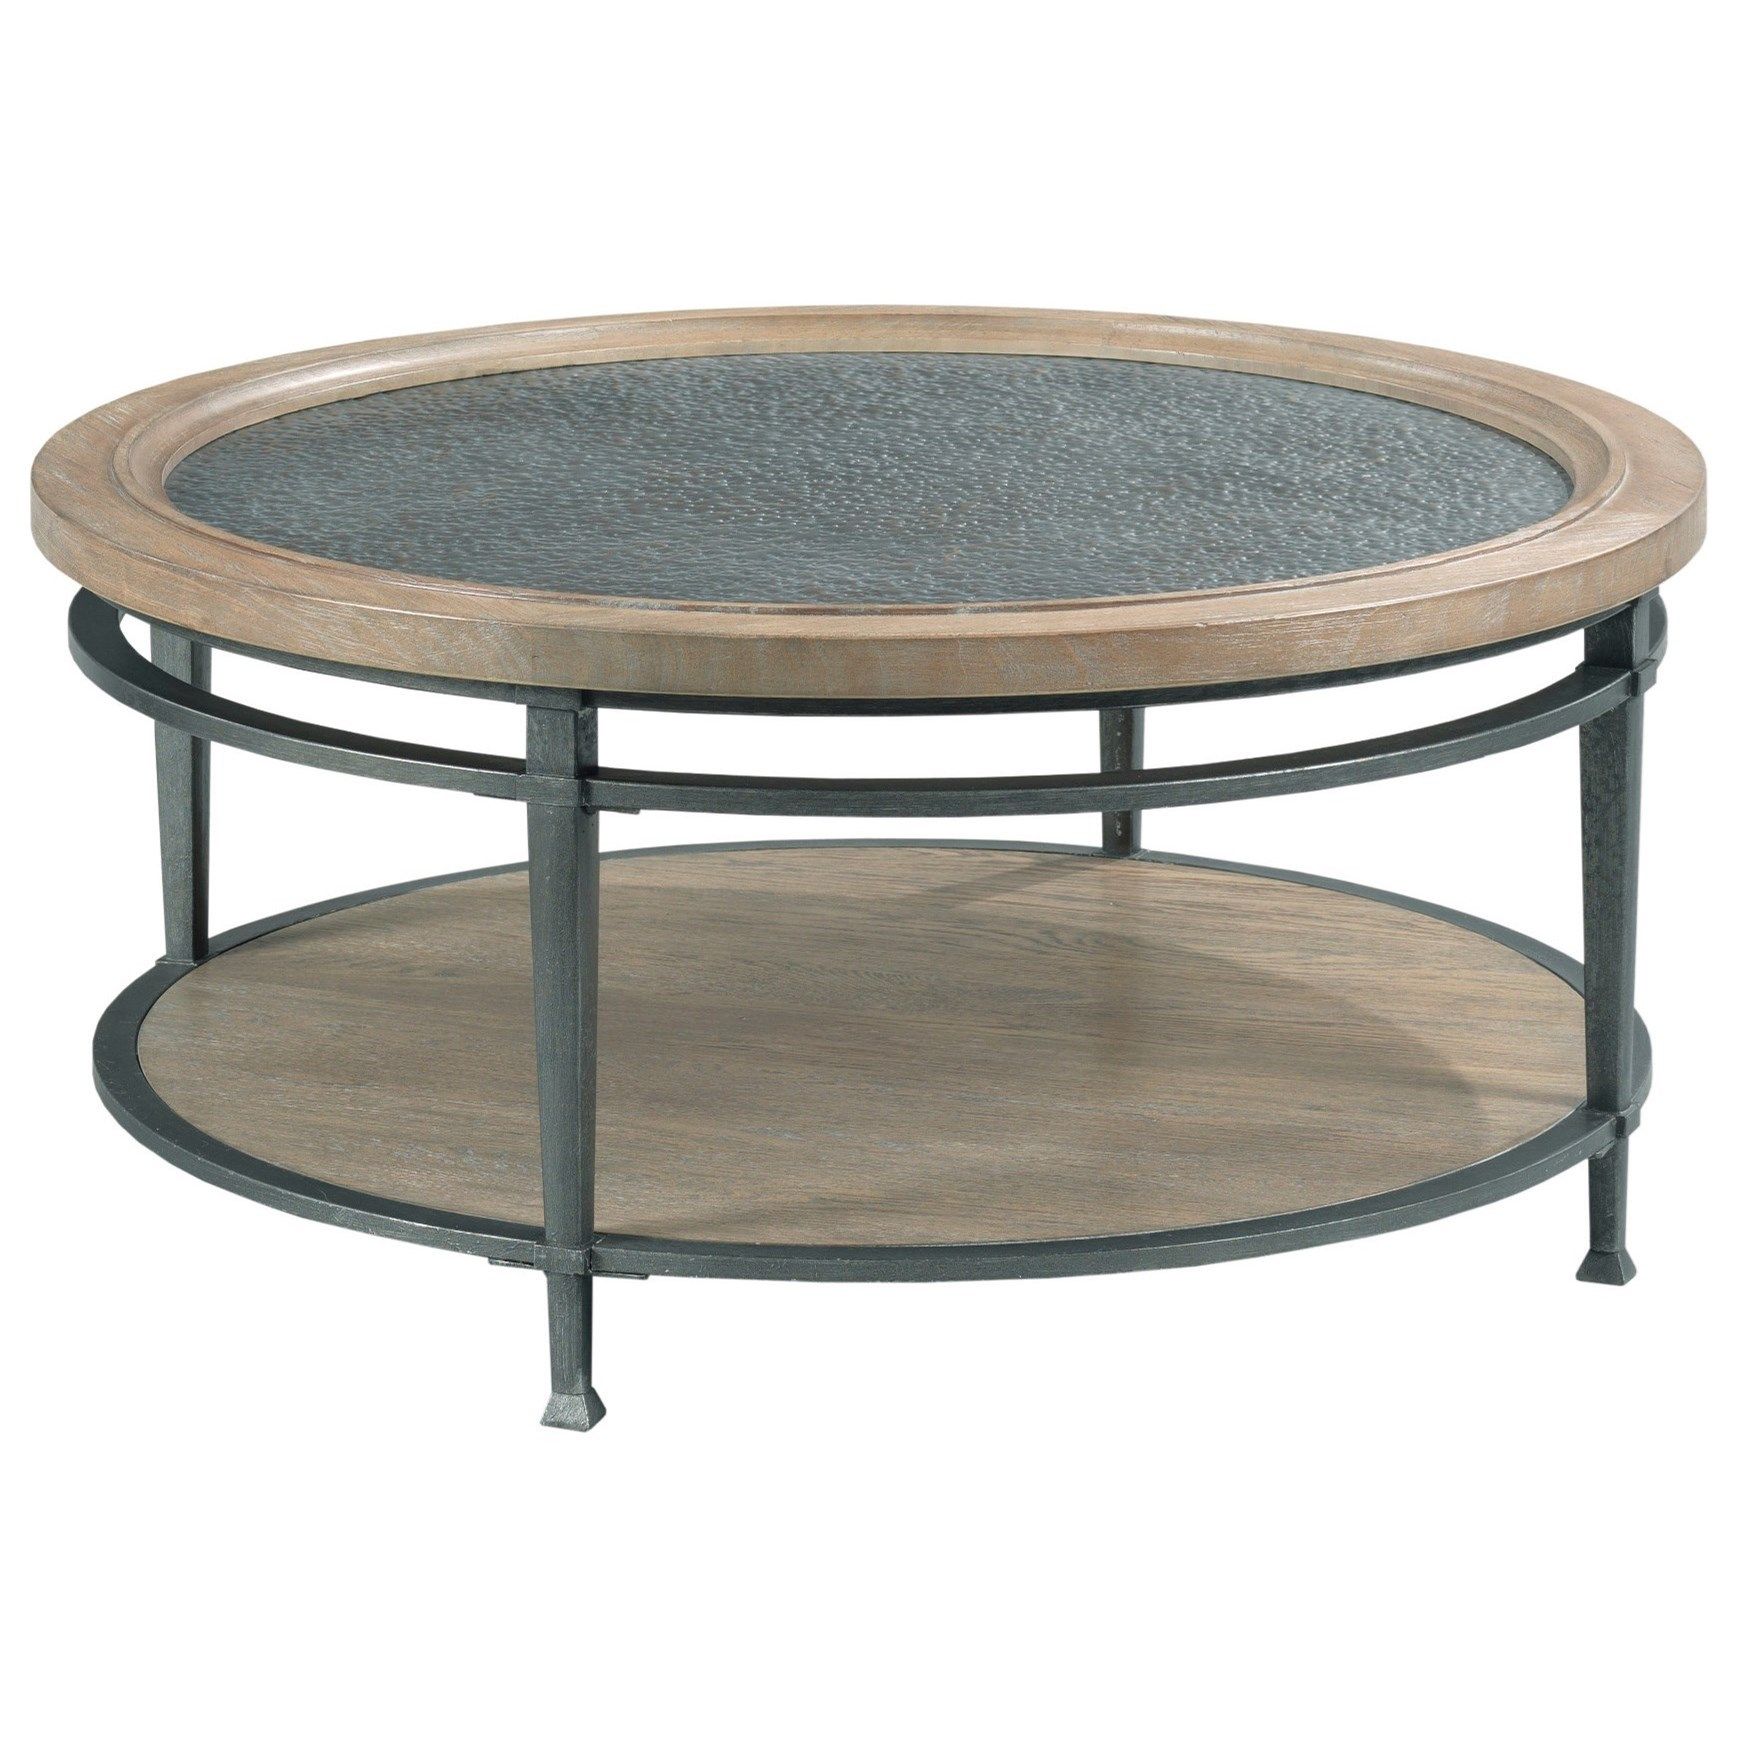 Hammary Austin Transitional Round Coffee Table | Wilson's Furniture In American Heritage Round Coffee Tables (View 13 of 15)